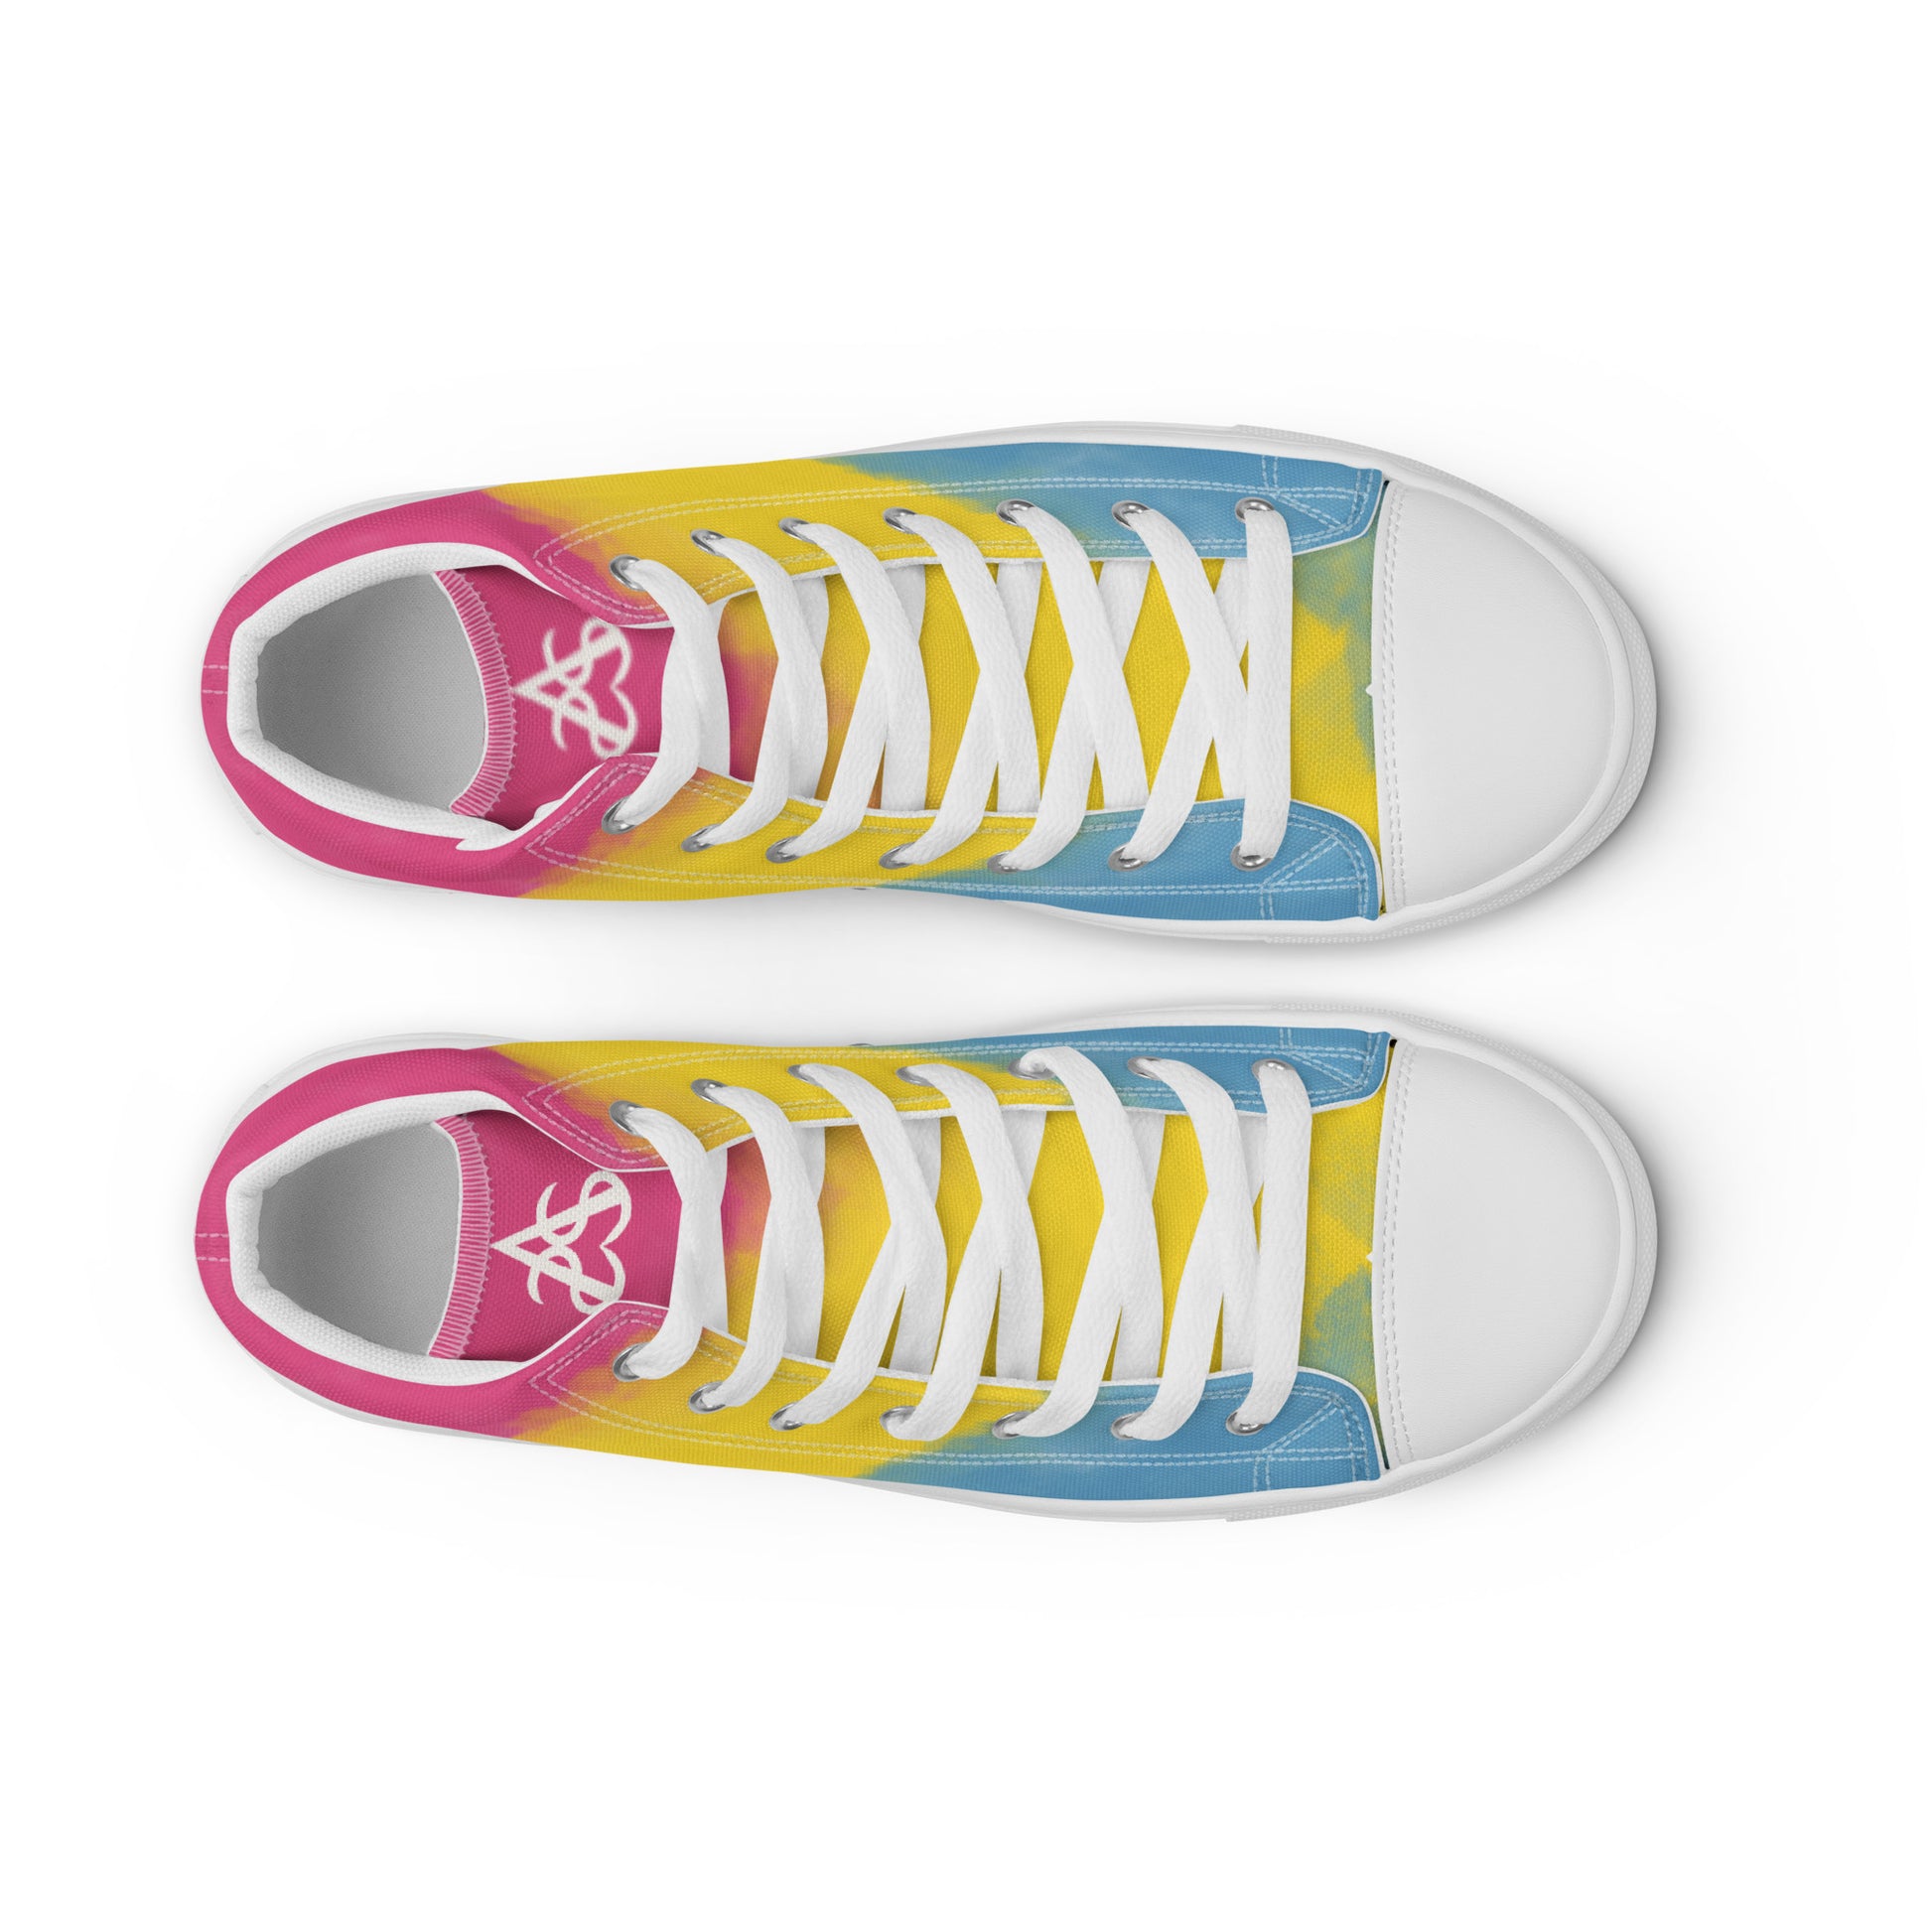 Top view: a pair of high top shoes with color block pink, yellow, and blue clouds, a white hand drawn heart, and the Aras Sivad logo on the back.